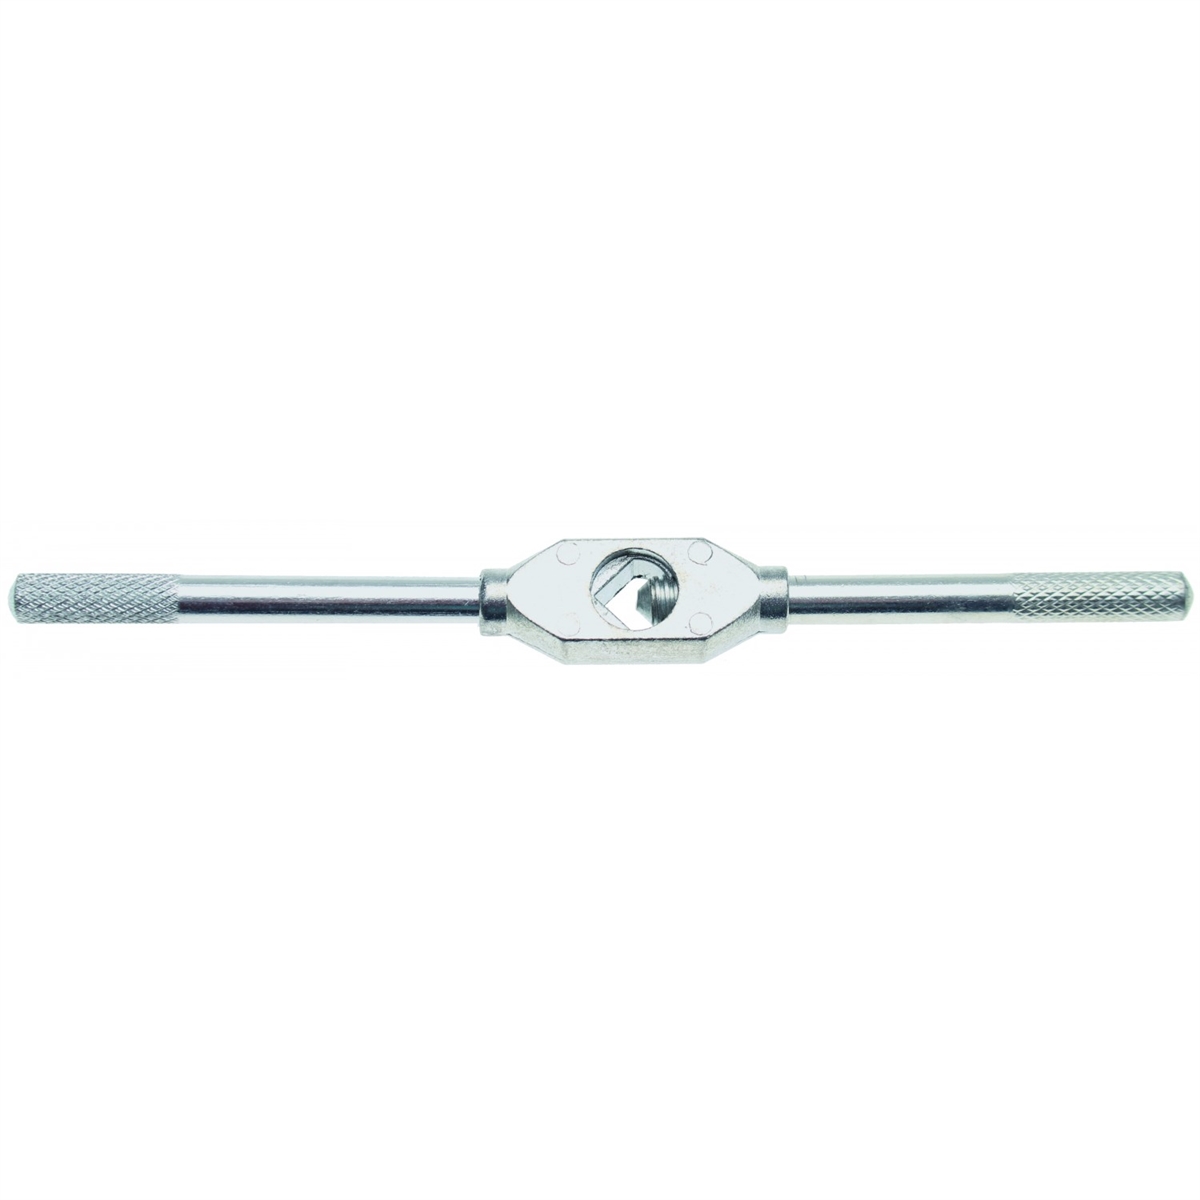 Tap Wrench for BGS 1987 - Code BGS1987-1